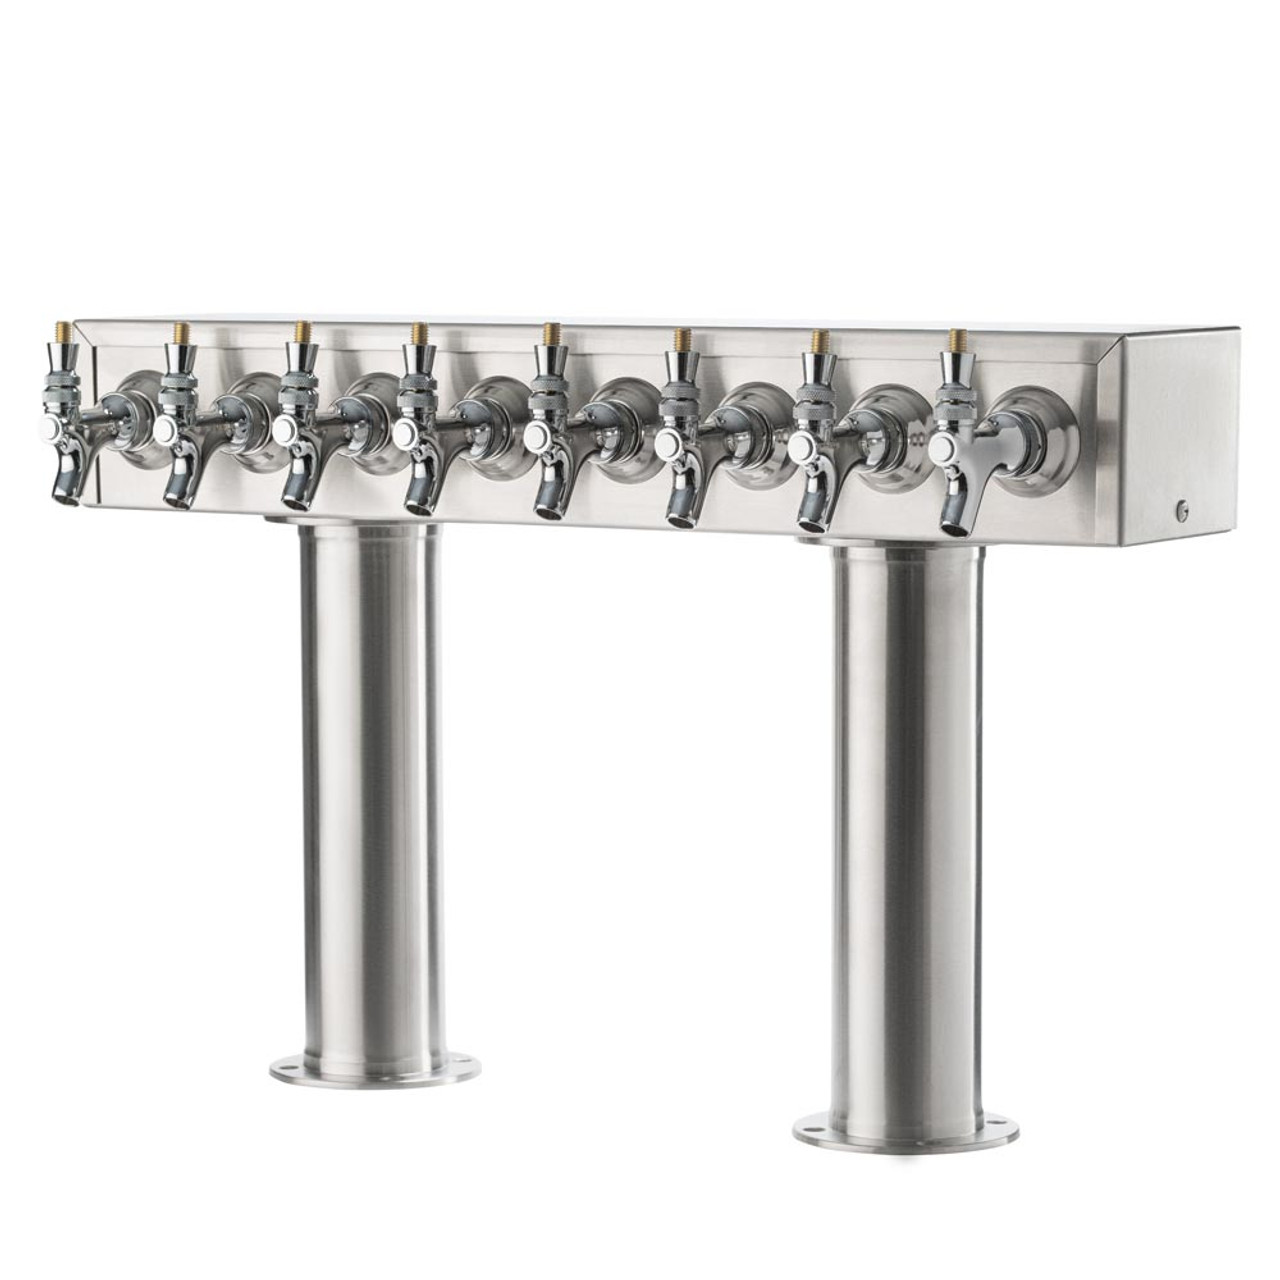 https://cdn11.bigcommerce.com/s-cznxq08r7/images/stencil/1280x1280/products/3783/8276/pt8ss_3-inches-_stainless_steel_8_tap_-_draft_beer_kegerator_h-tower_0006_2__25266.1590771861.jpg?c=1